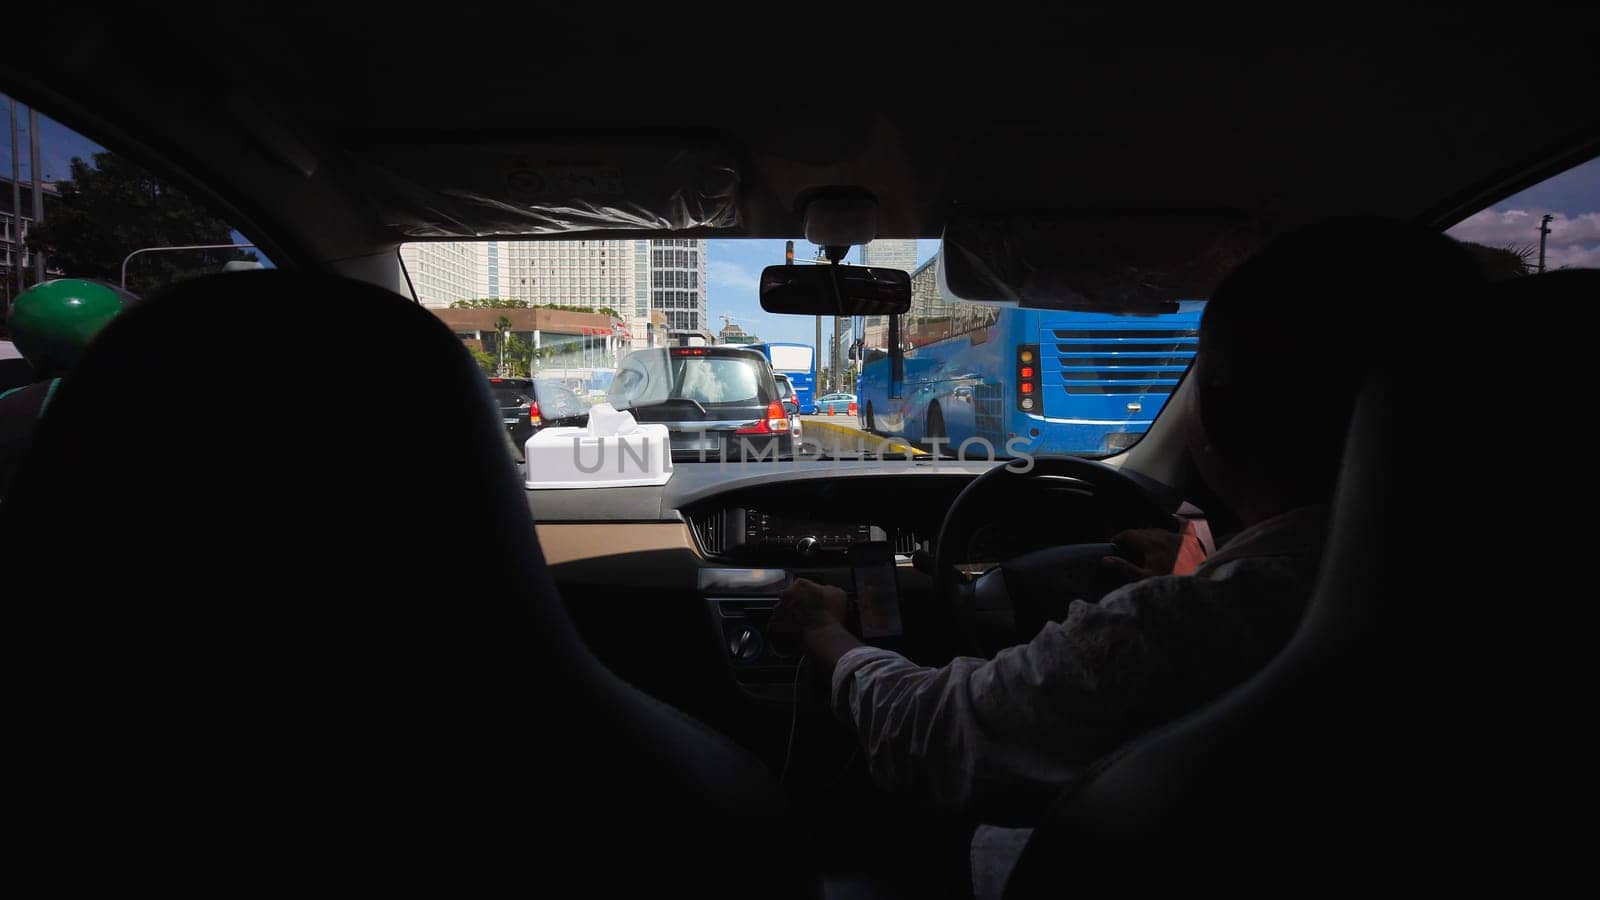 Inside the interior of a cab car in Jakarta. Indonesia. by DovidPro